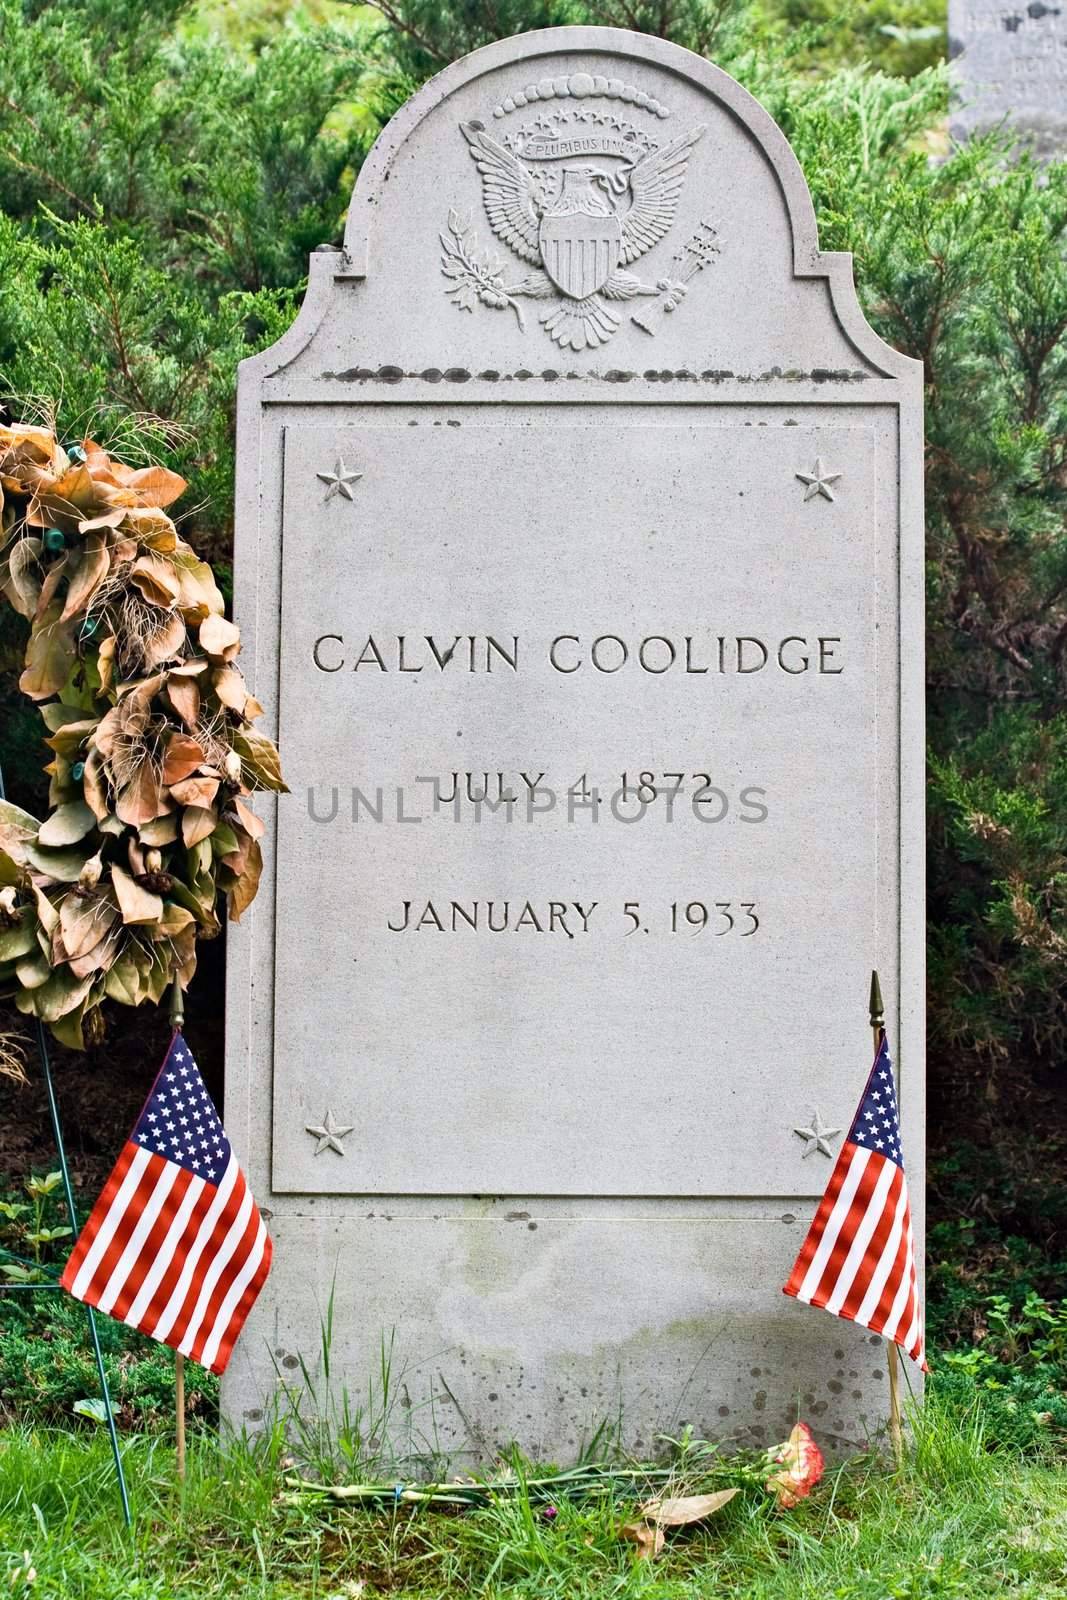 The gravestone of Calvin Coolidge at his gravesite in Plymouth, Vermont.